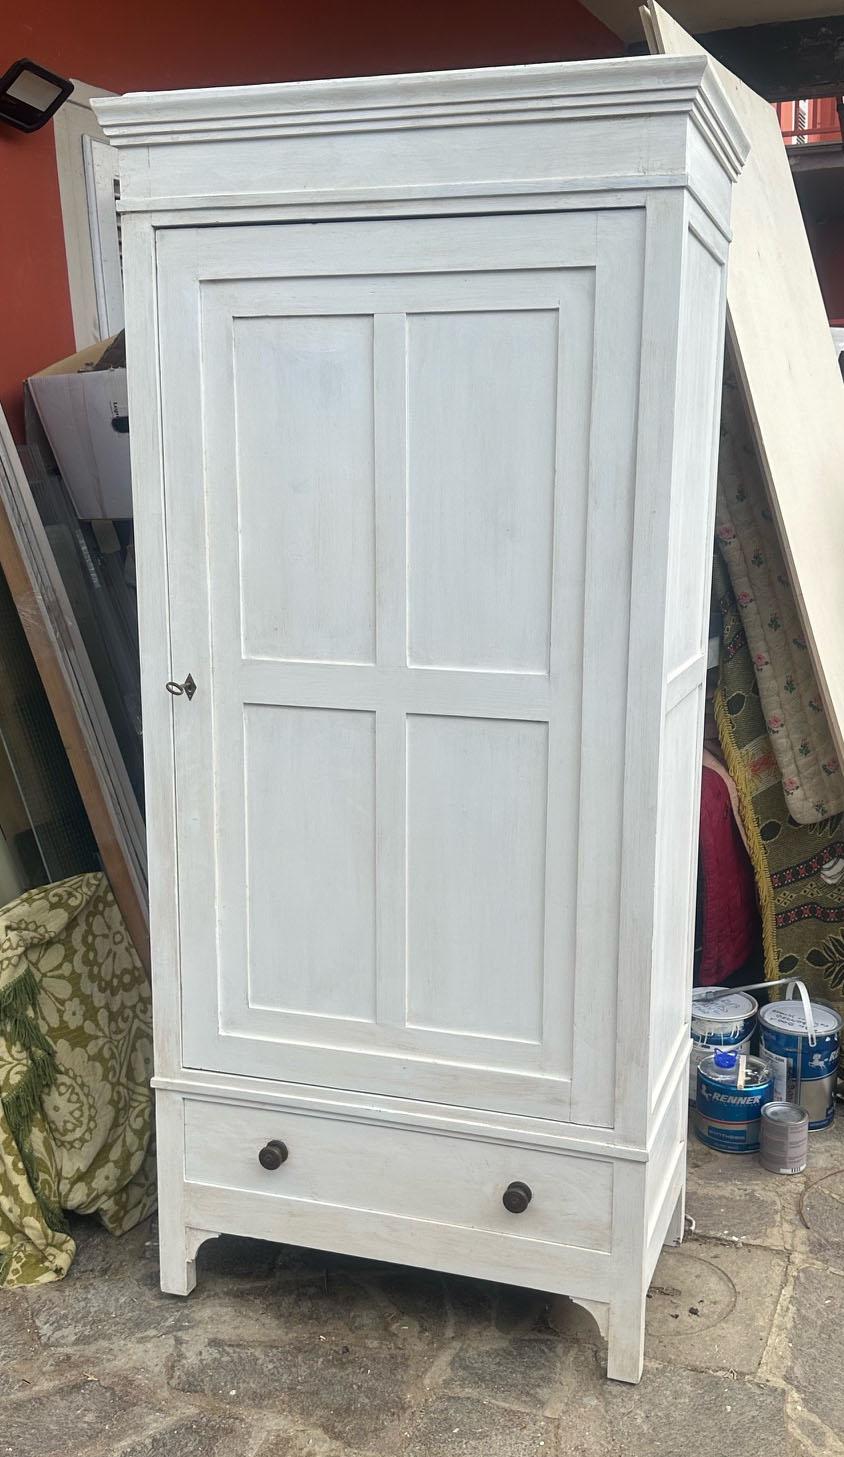 20th Century Italian shabby  white Wardrobe with one door and drawer. 
Inside there is a clothes rail and it is finished with shellac and wax in light walnut colour. 
Remember that the wardrobe cannot be dismantled, so if it has to fit through